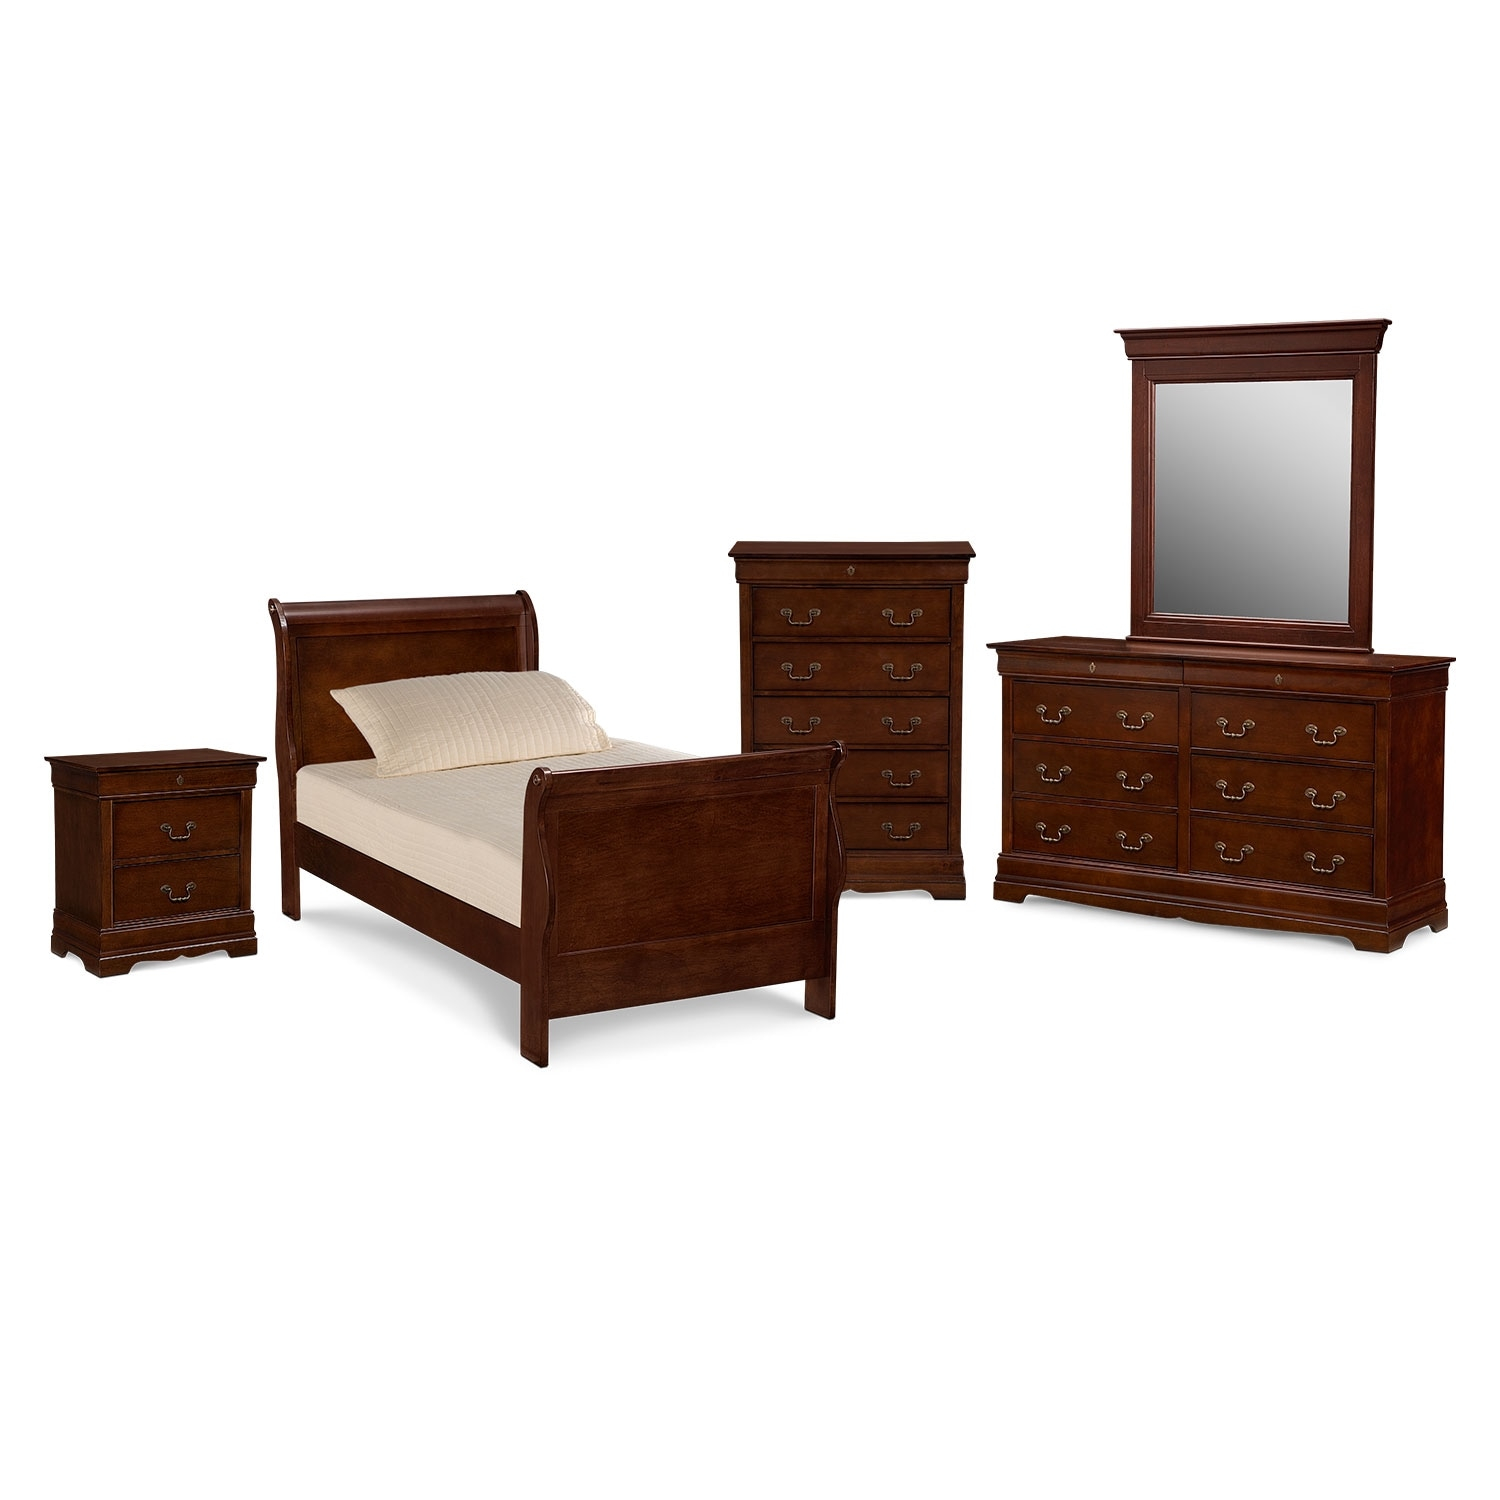 Neo Classic Youth 7 Piece Bedroom Set With Chest Nightstand Dresser And Mirror throughout dimensions 1500 X 1500